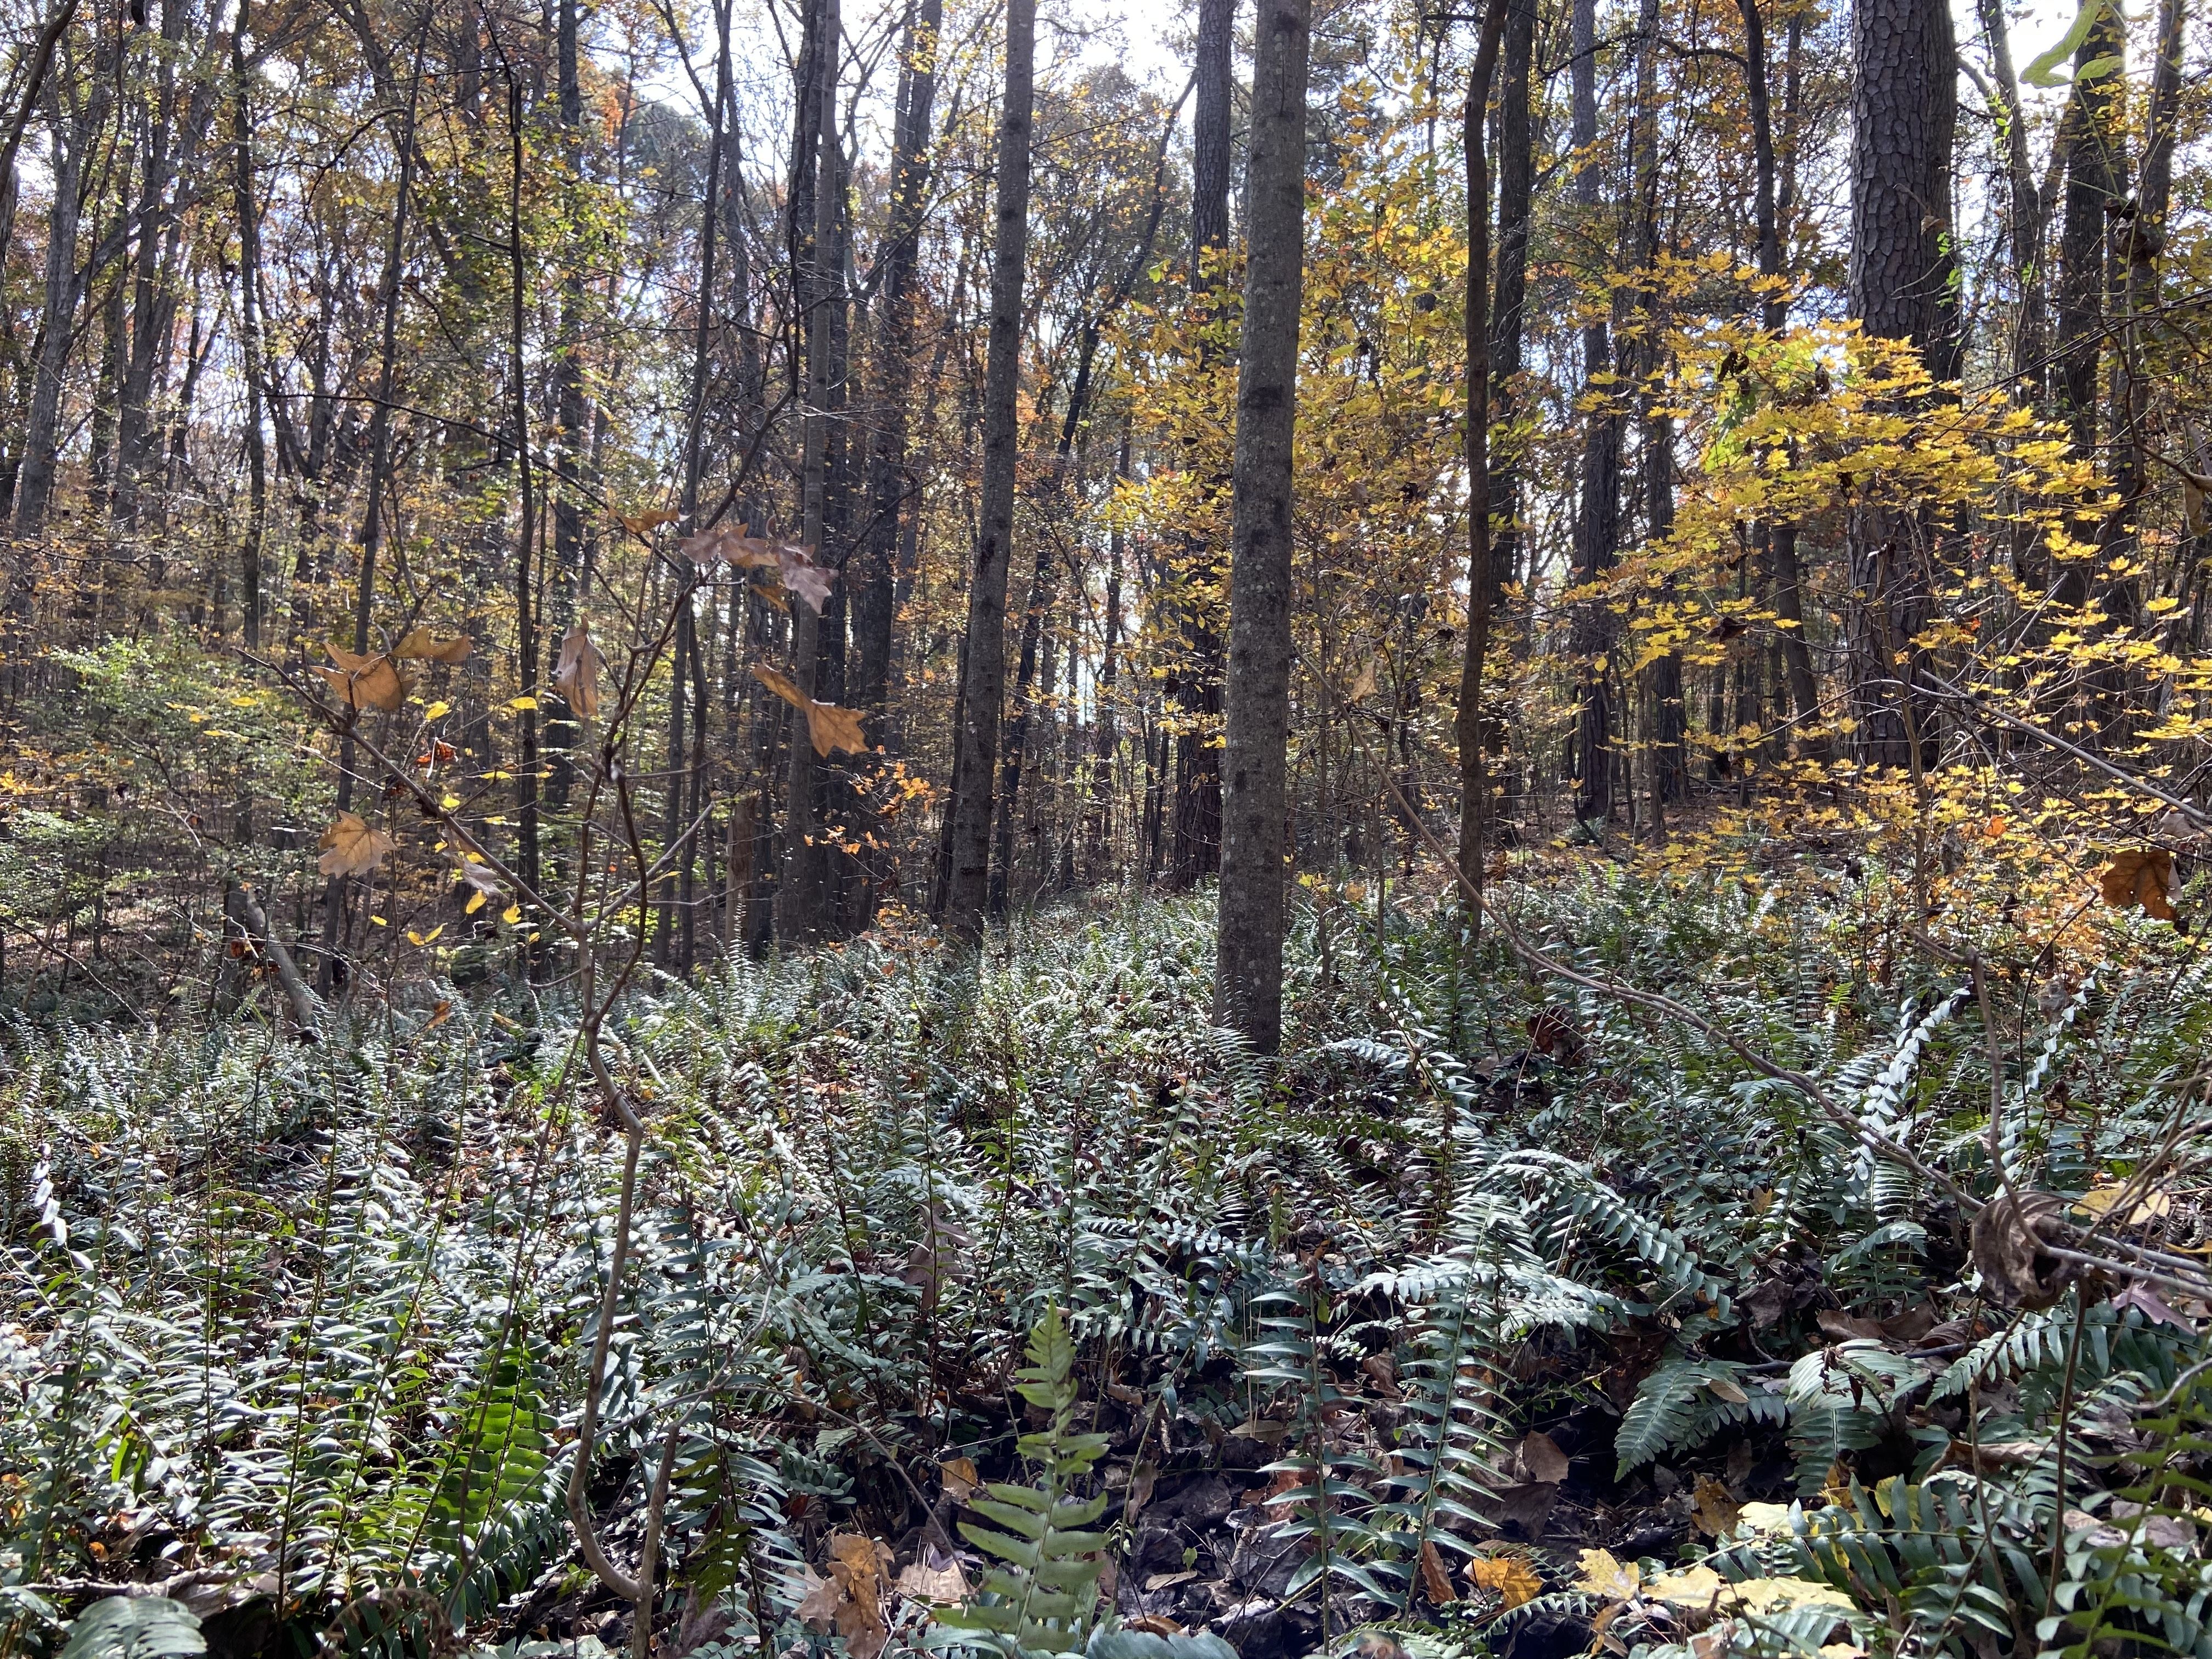 A photo of ferns in the middle of a forest during the autumn